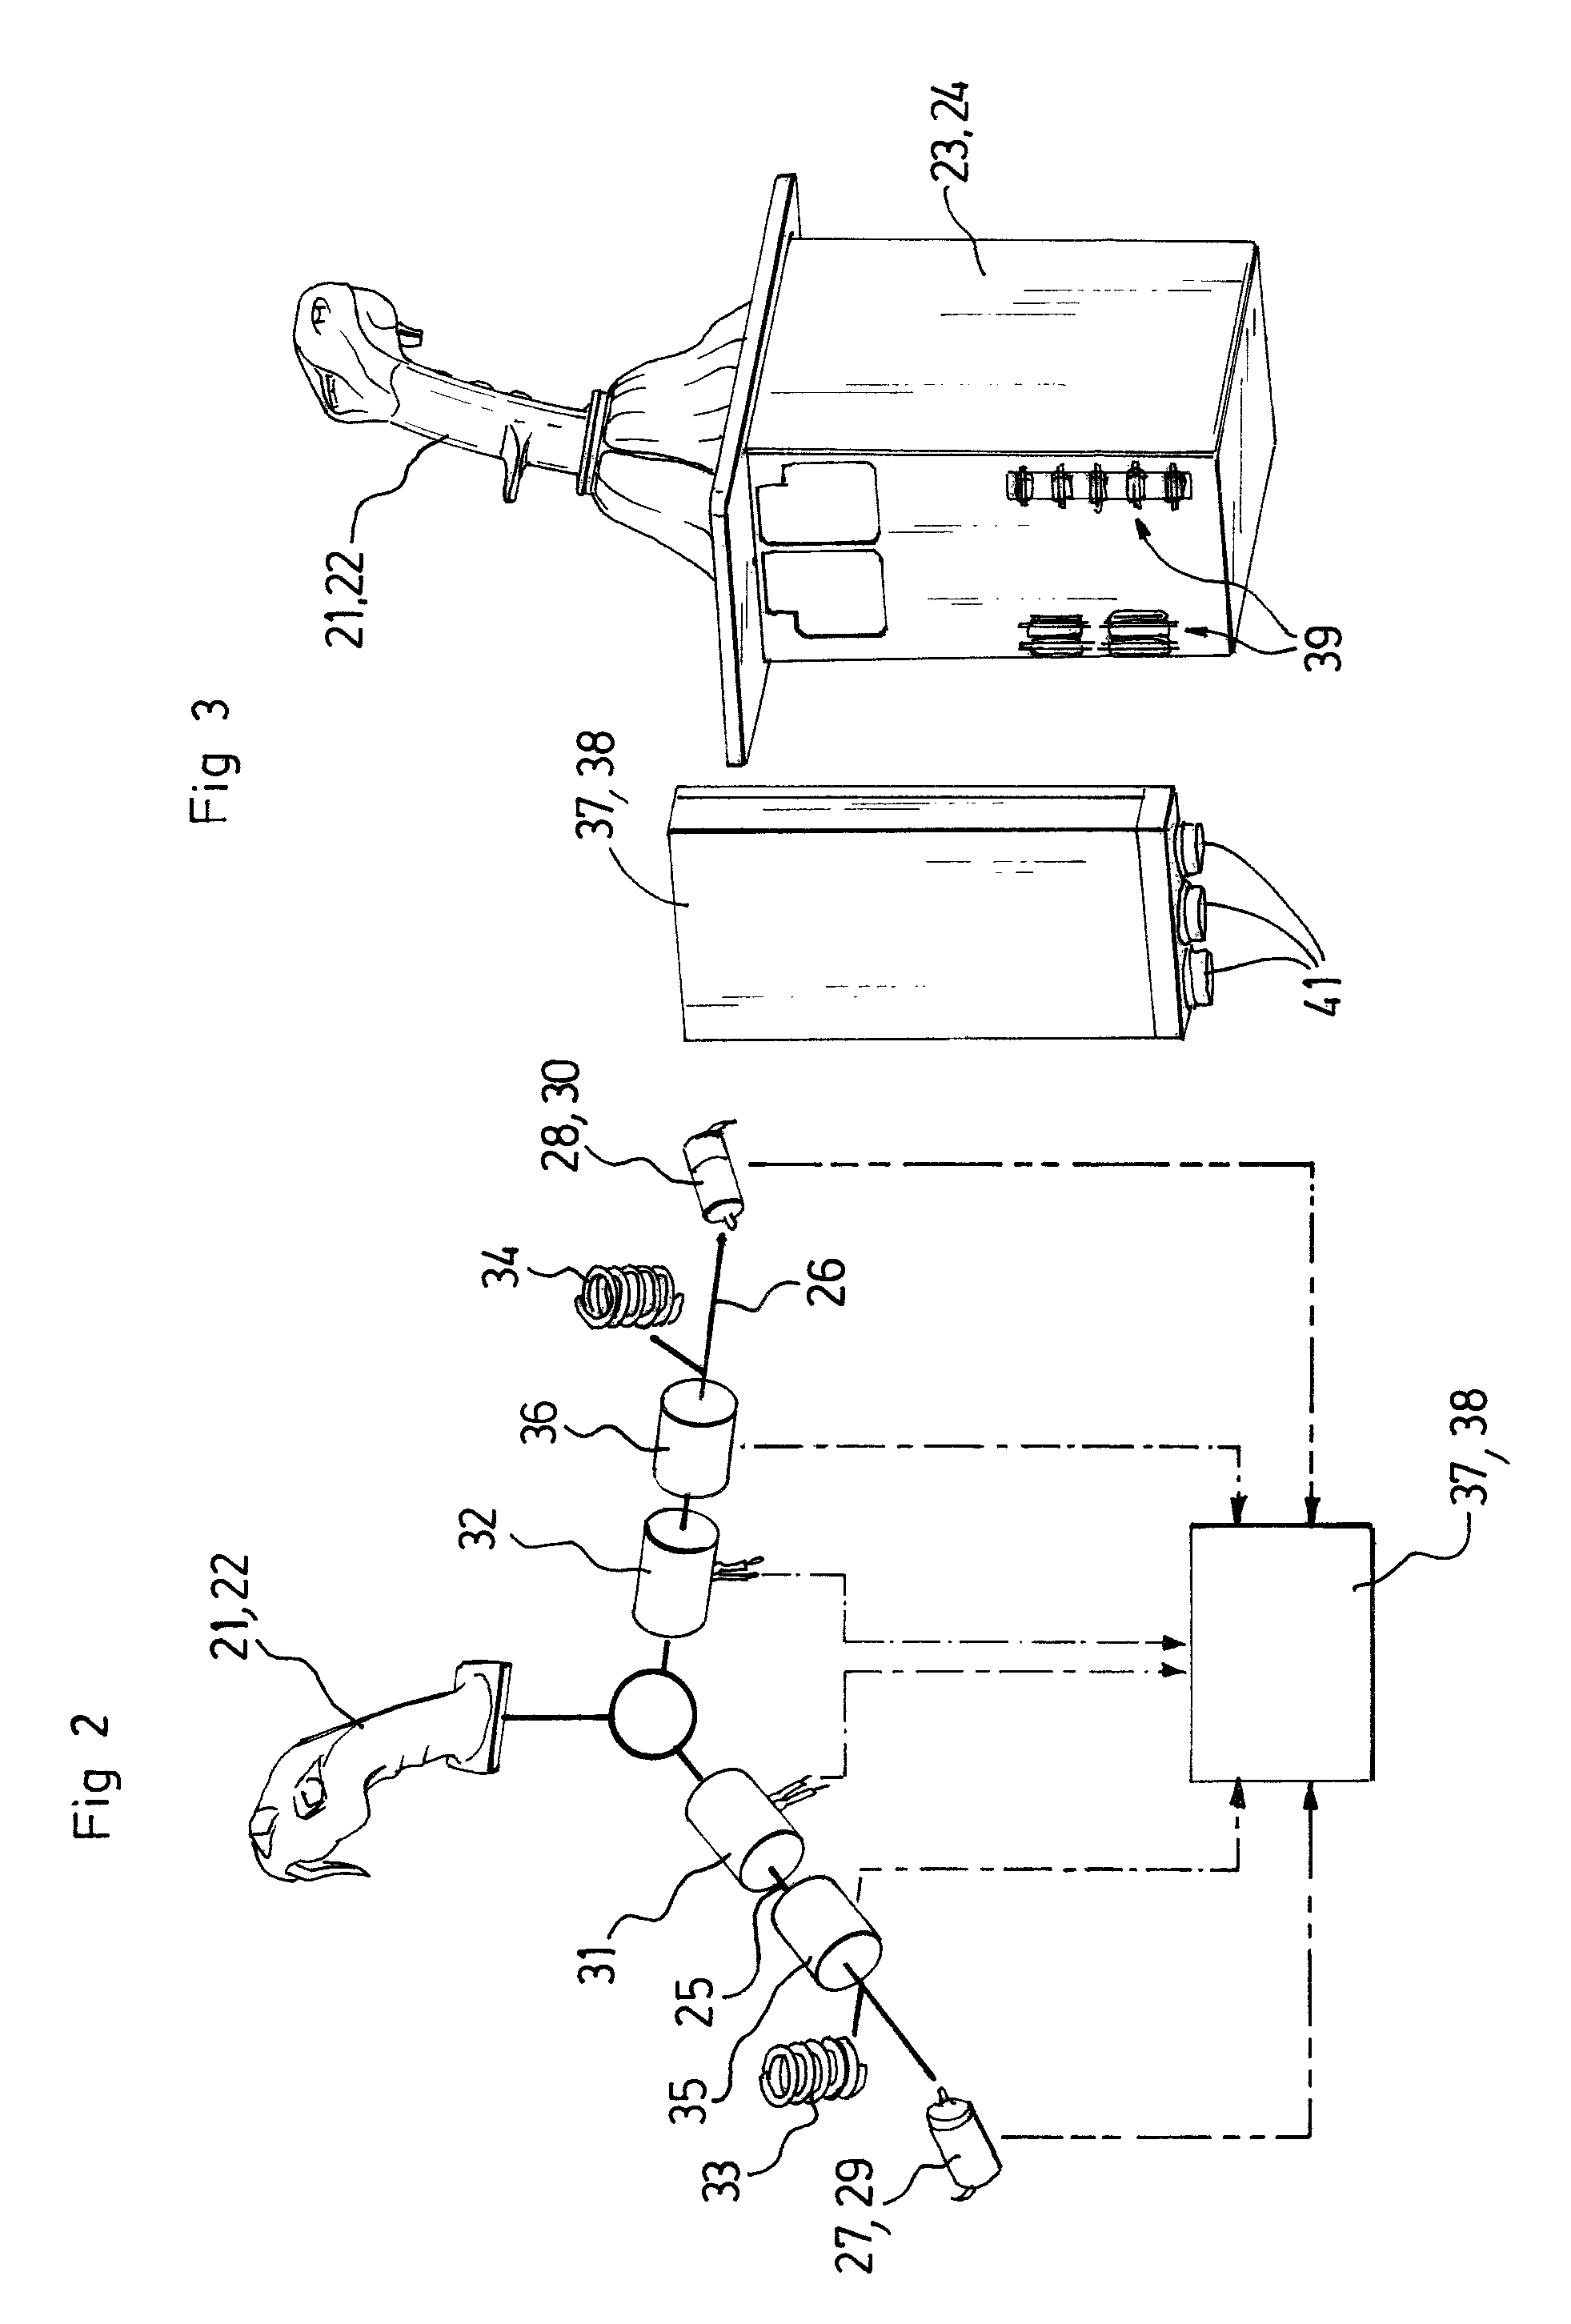 Electronic operational control device for a piloting member with cross-monitoring, piloting device and aircraft